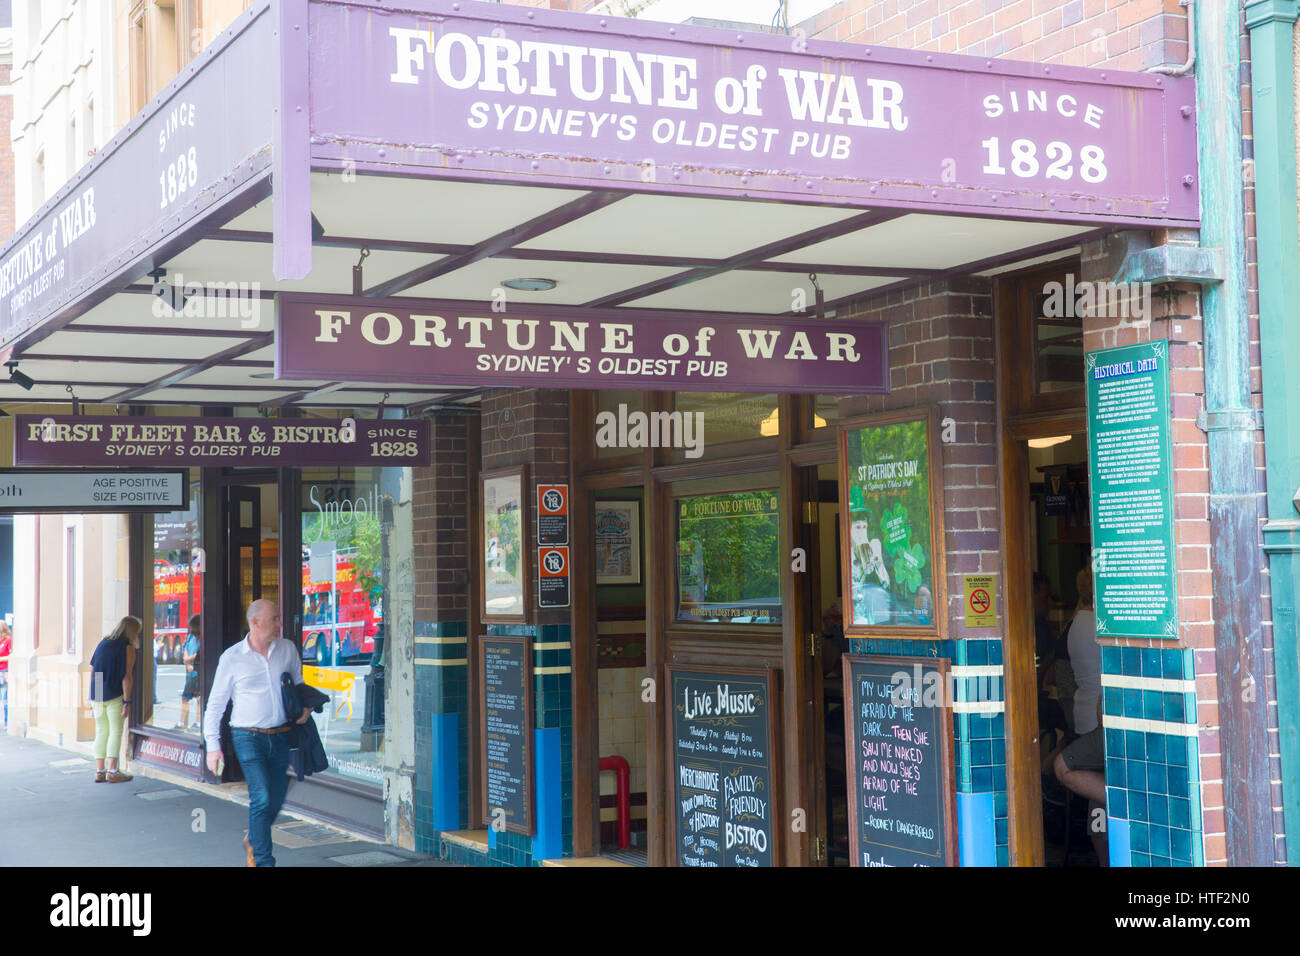 Fortune of War is there oldest pub in Sydney and is situated in the Rocks area ,New south wales,australia Stock Photo